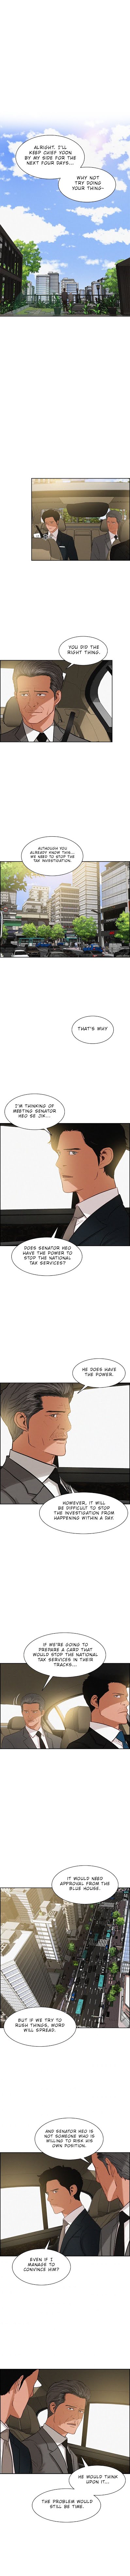 Lord Of Money - Page 3